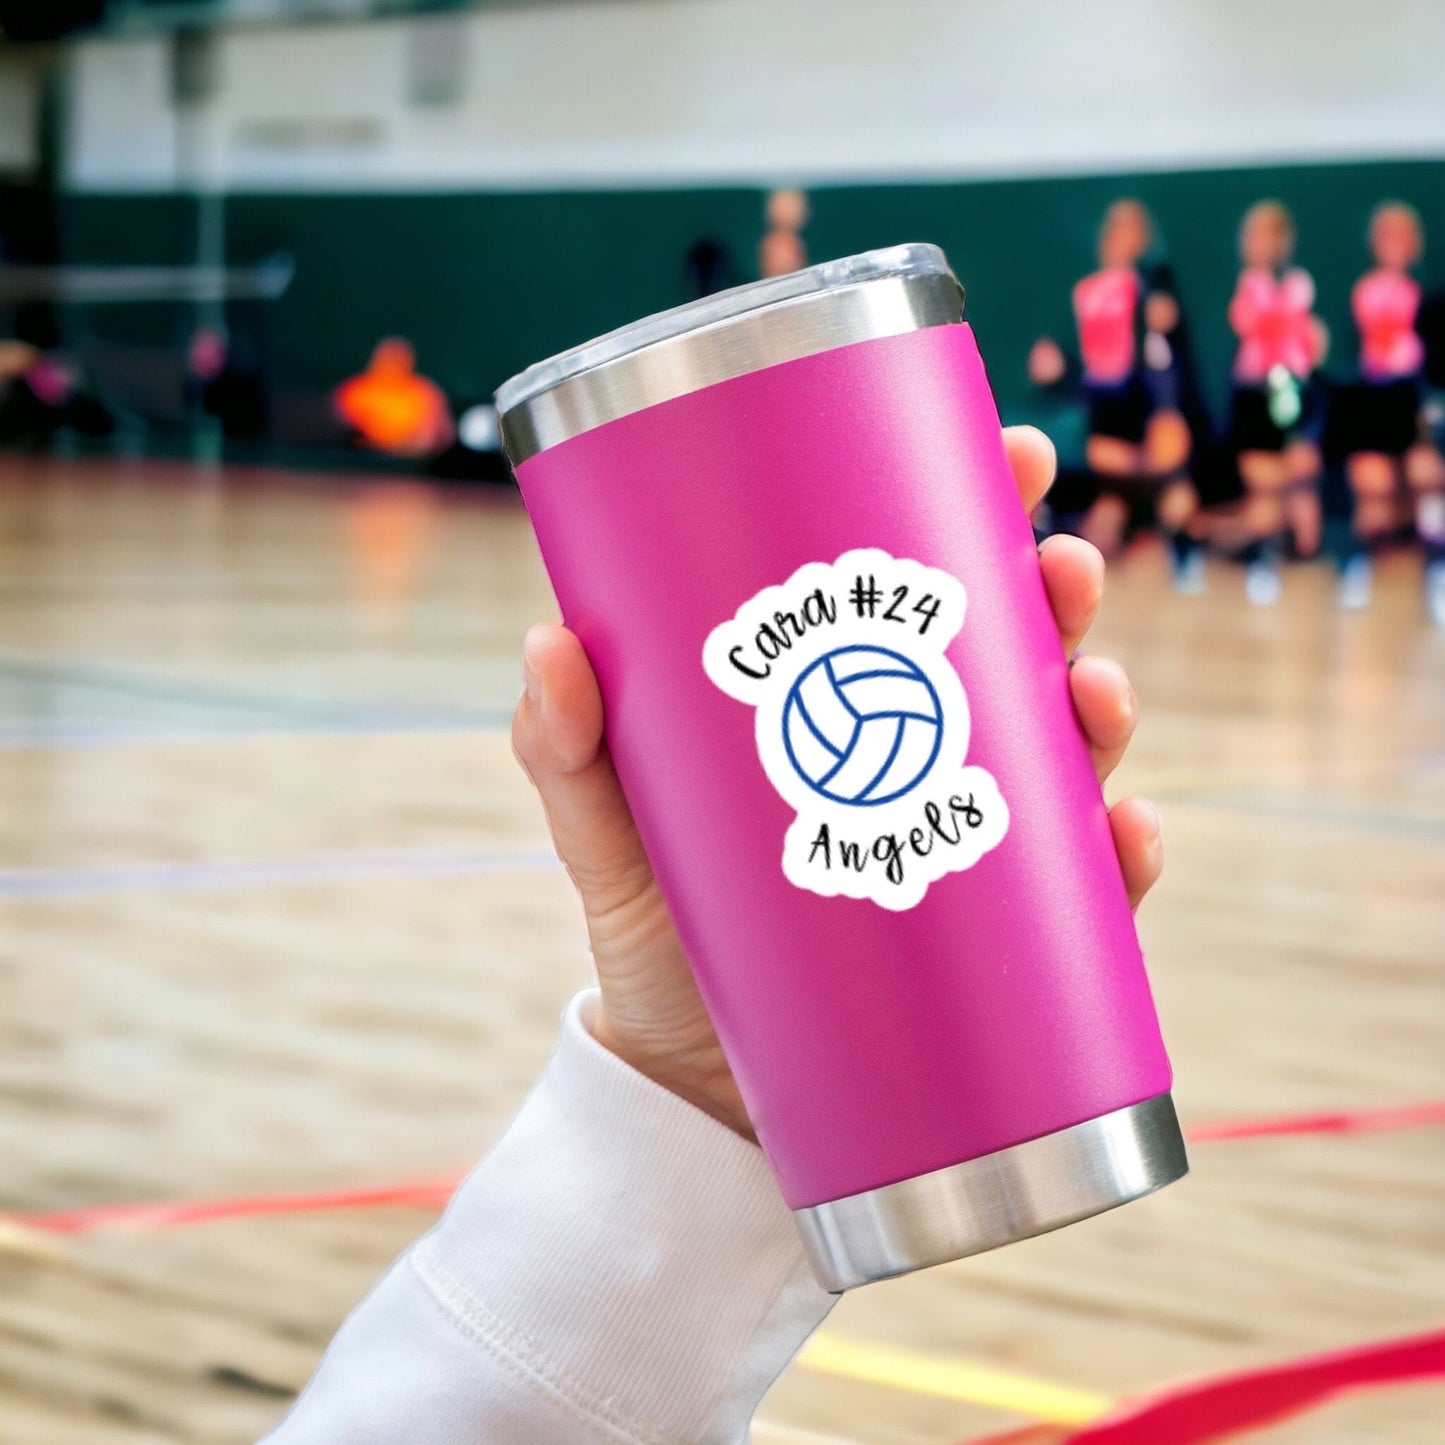 Personalized Team Volleyball stickers